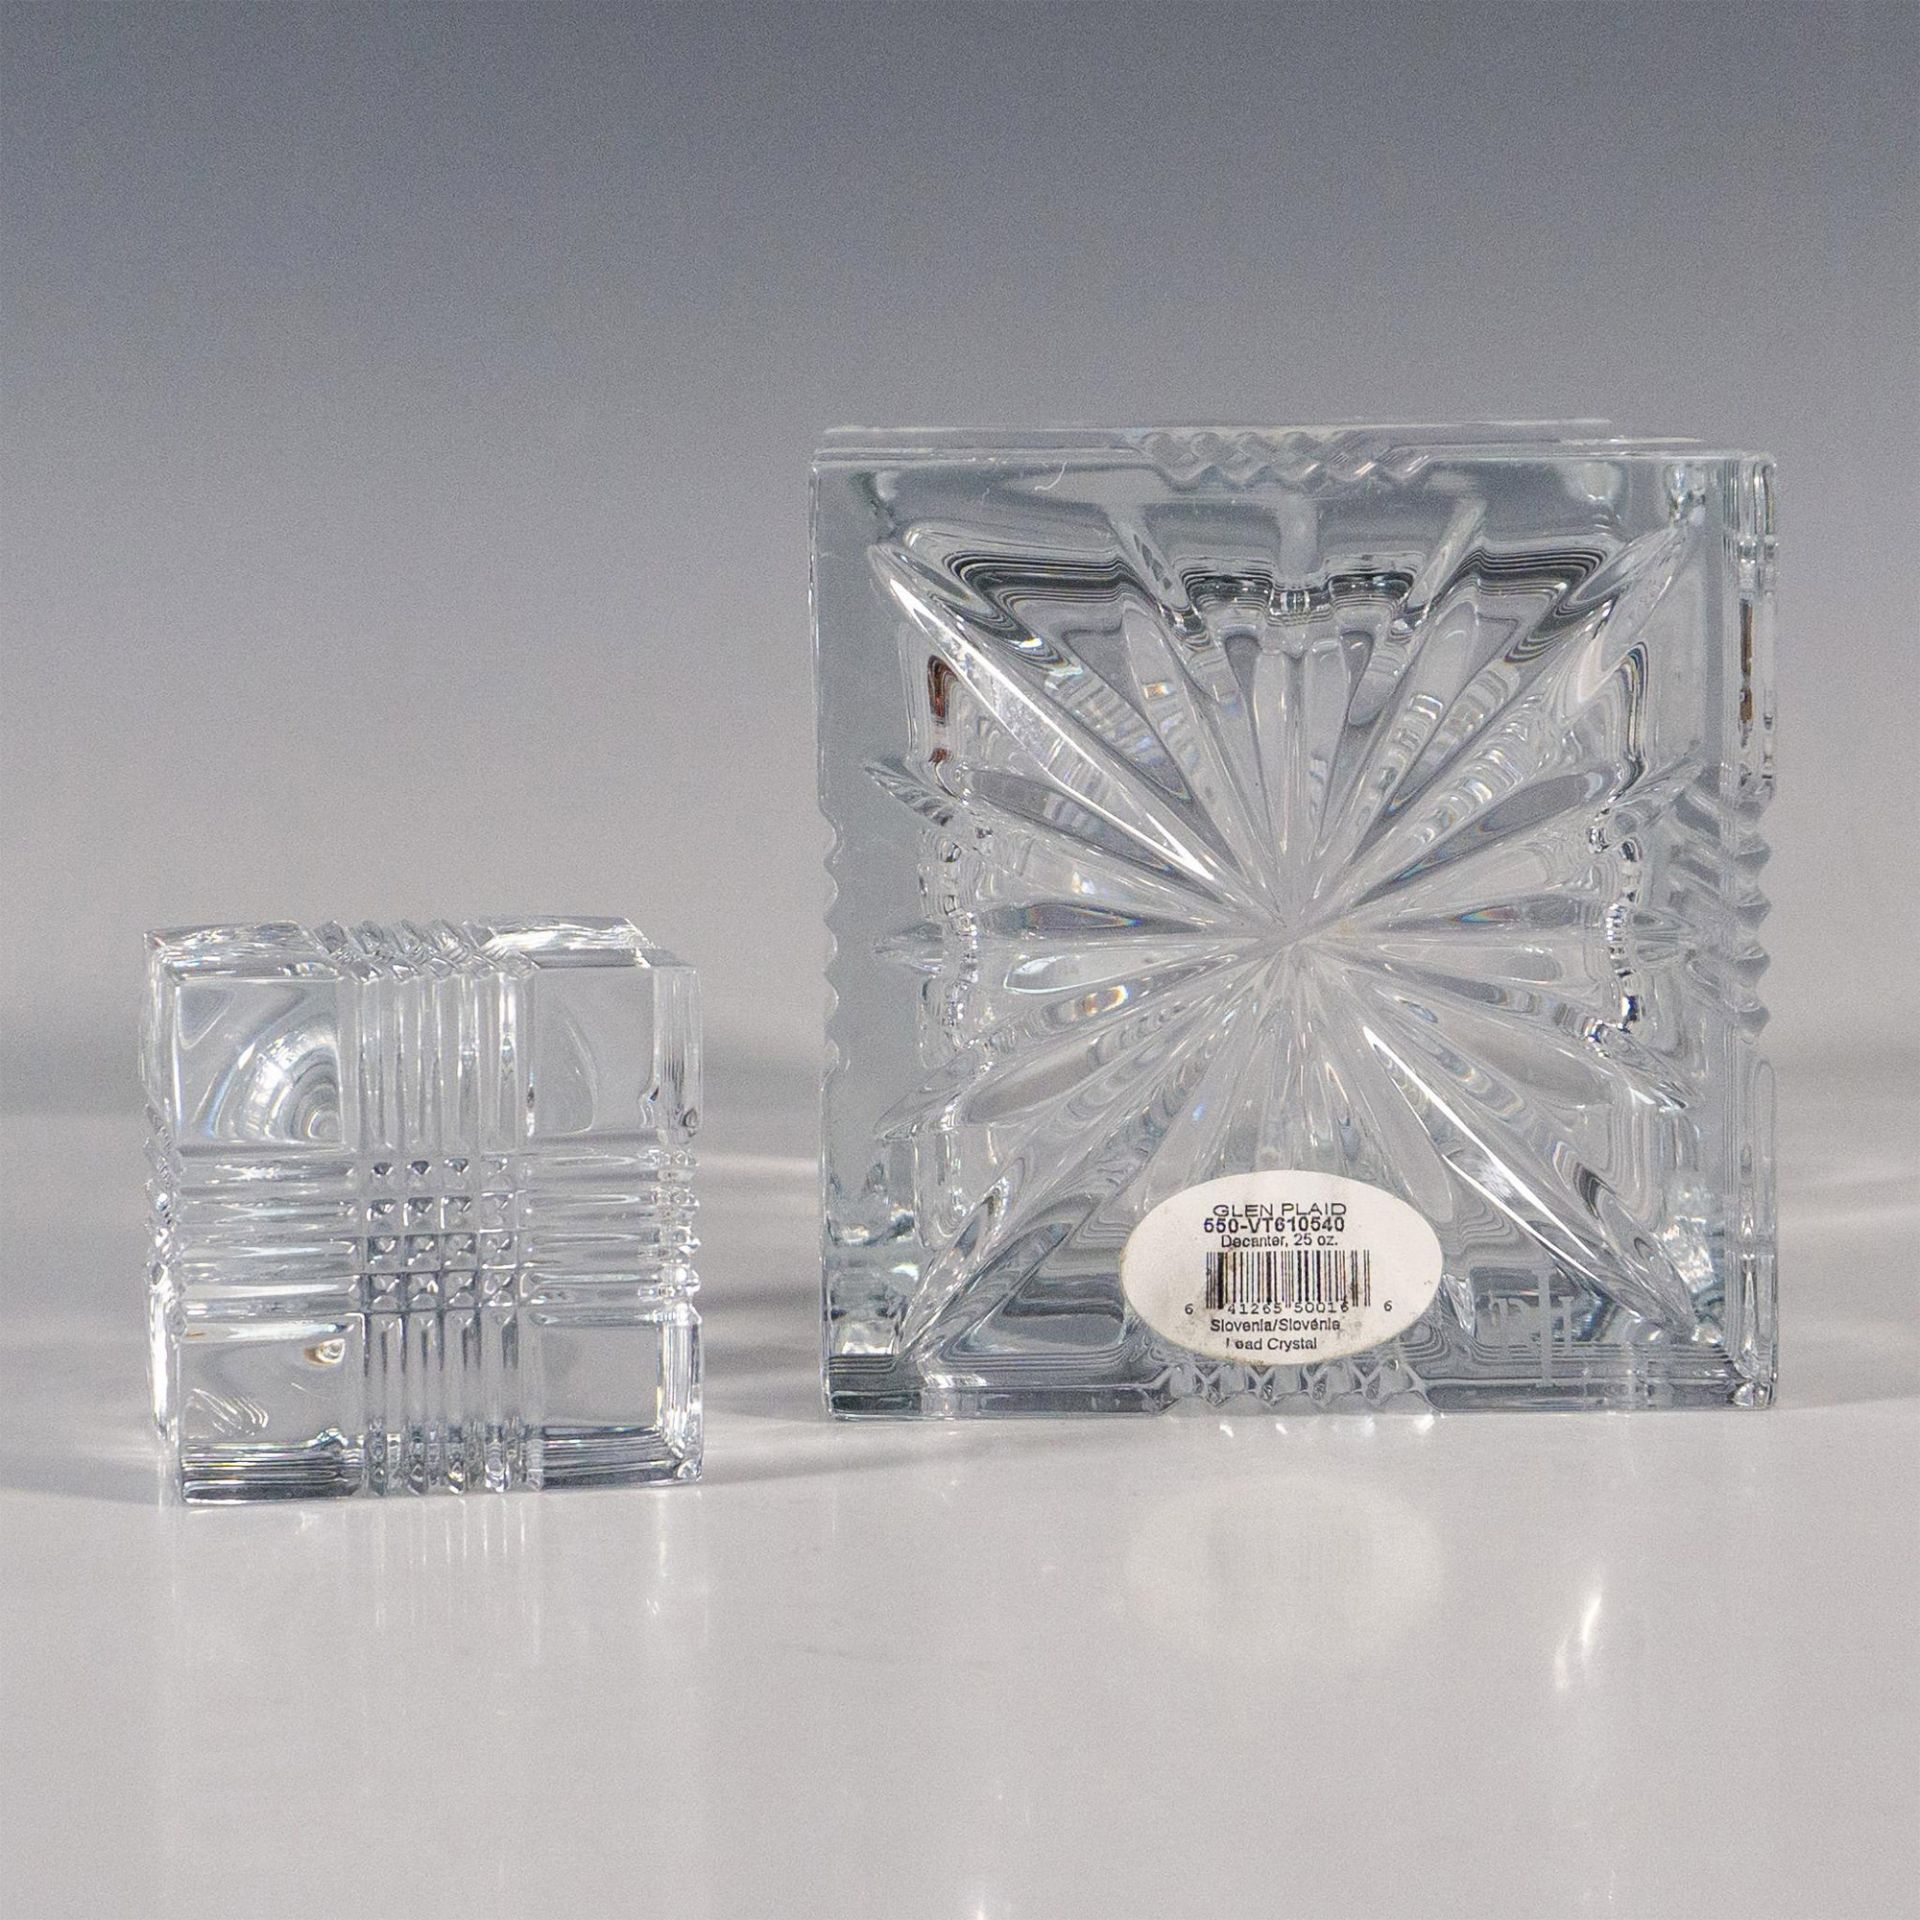 Ralph Lauren Crystal Decanter with Stopper, Glen Plaid - Image 4 of 4